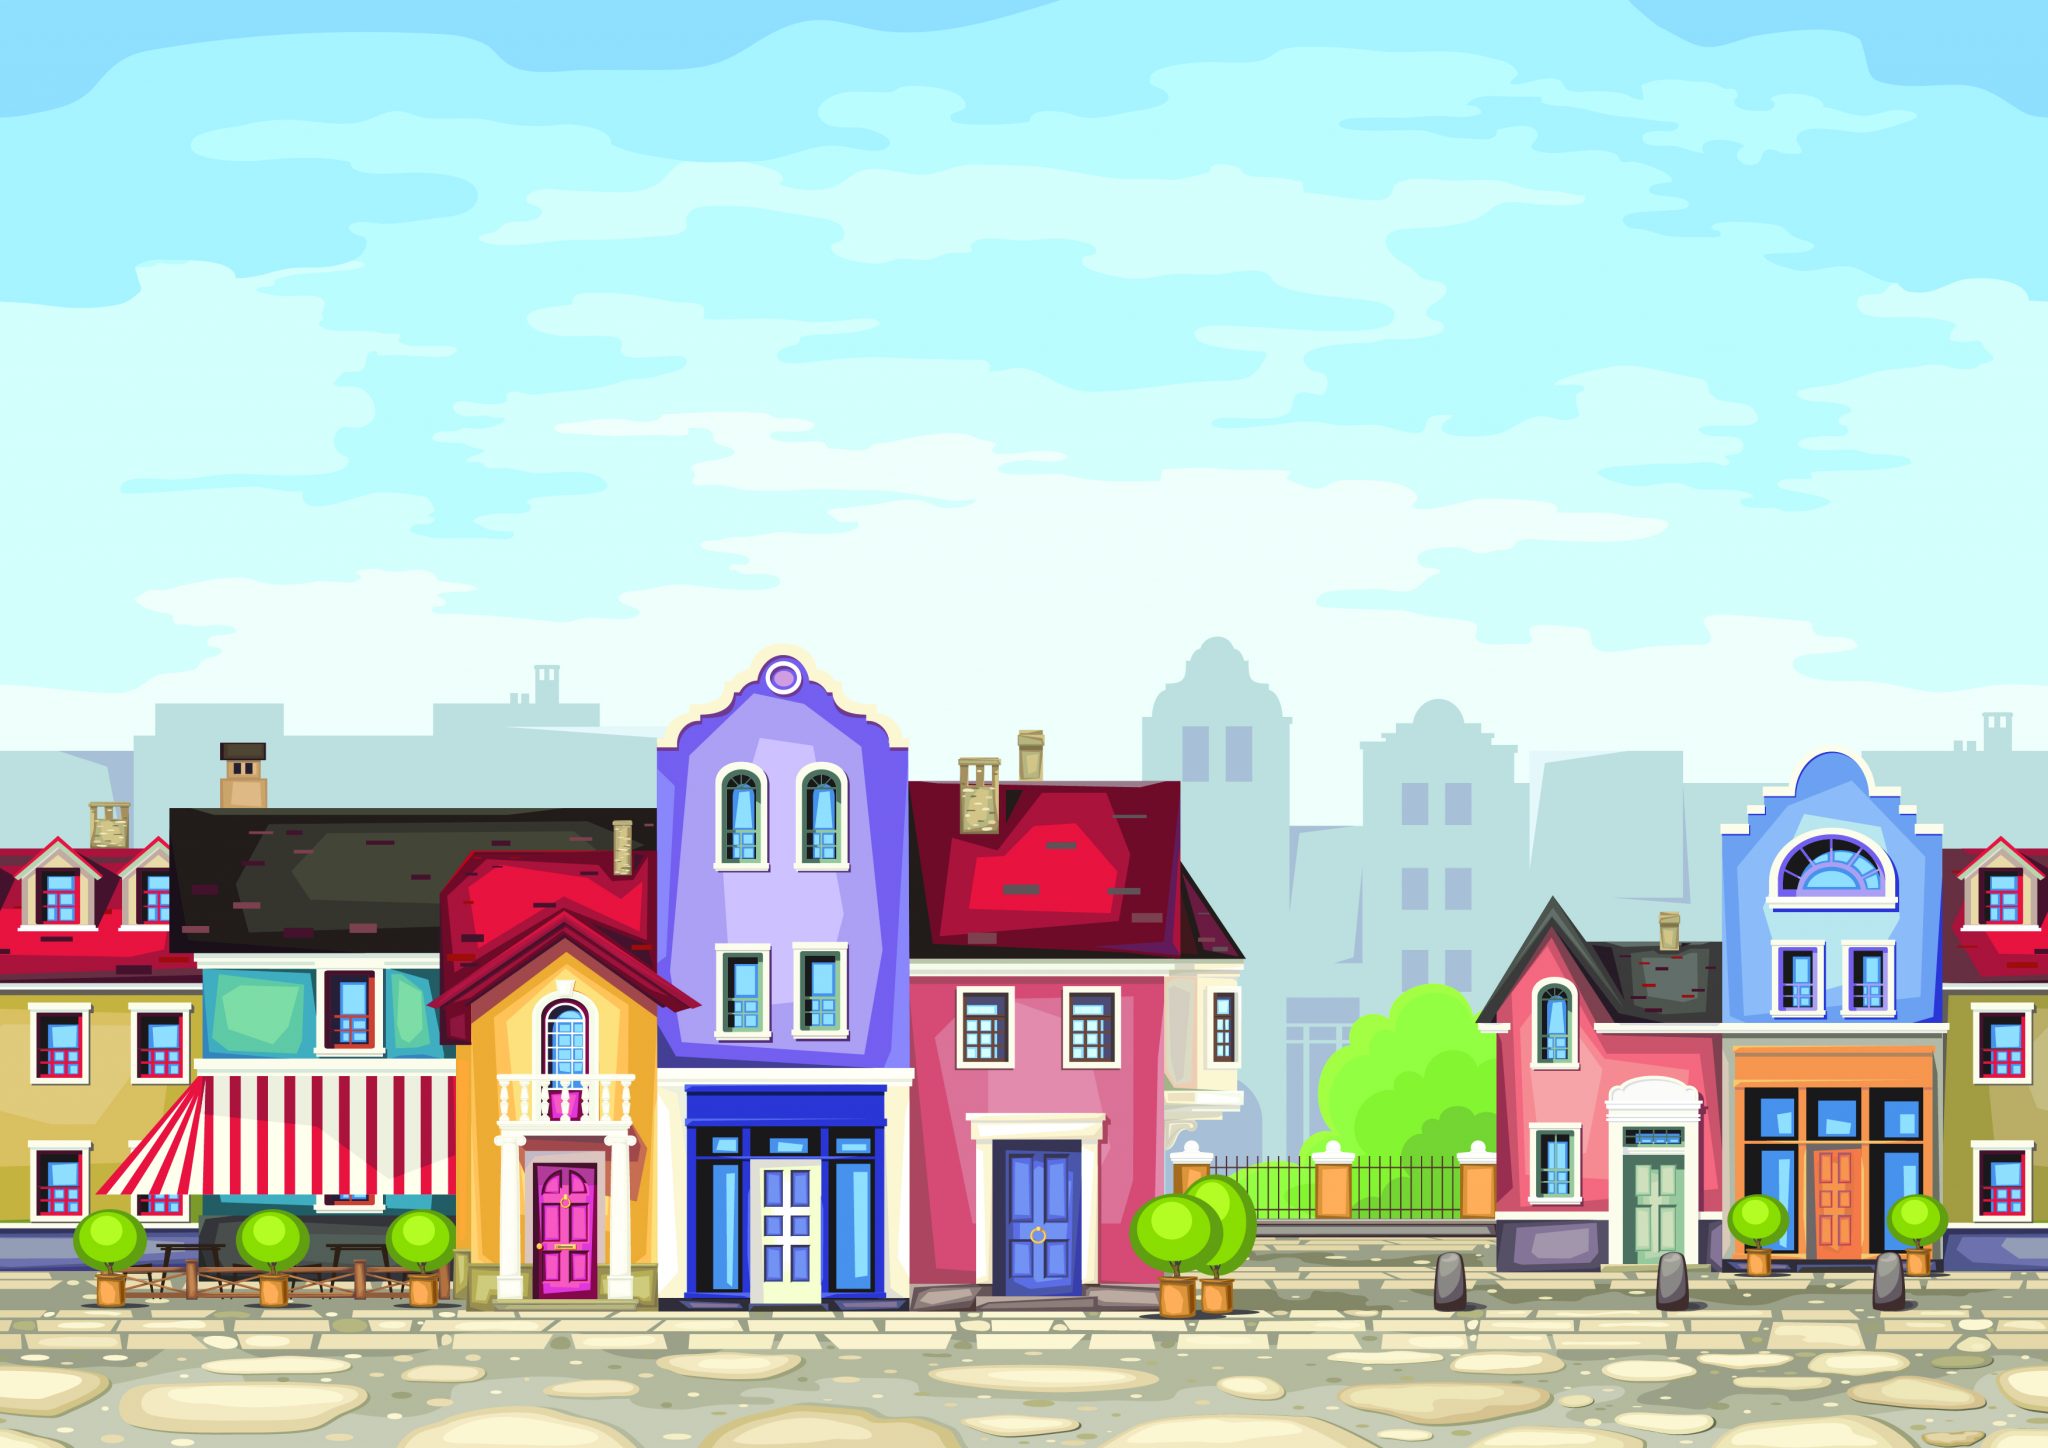 Illustration of downtown buildings in many colors